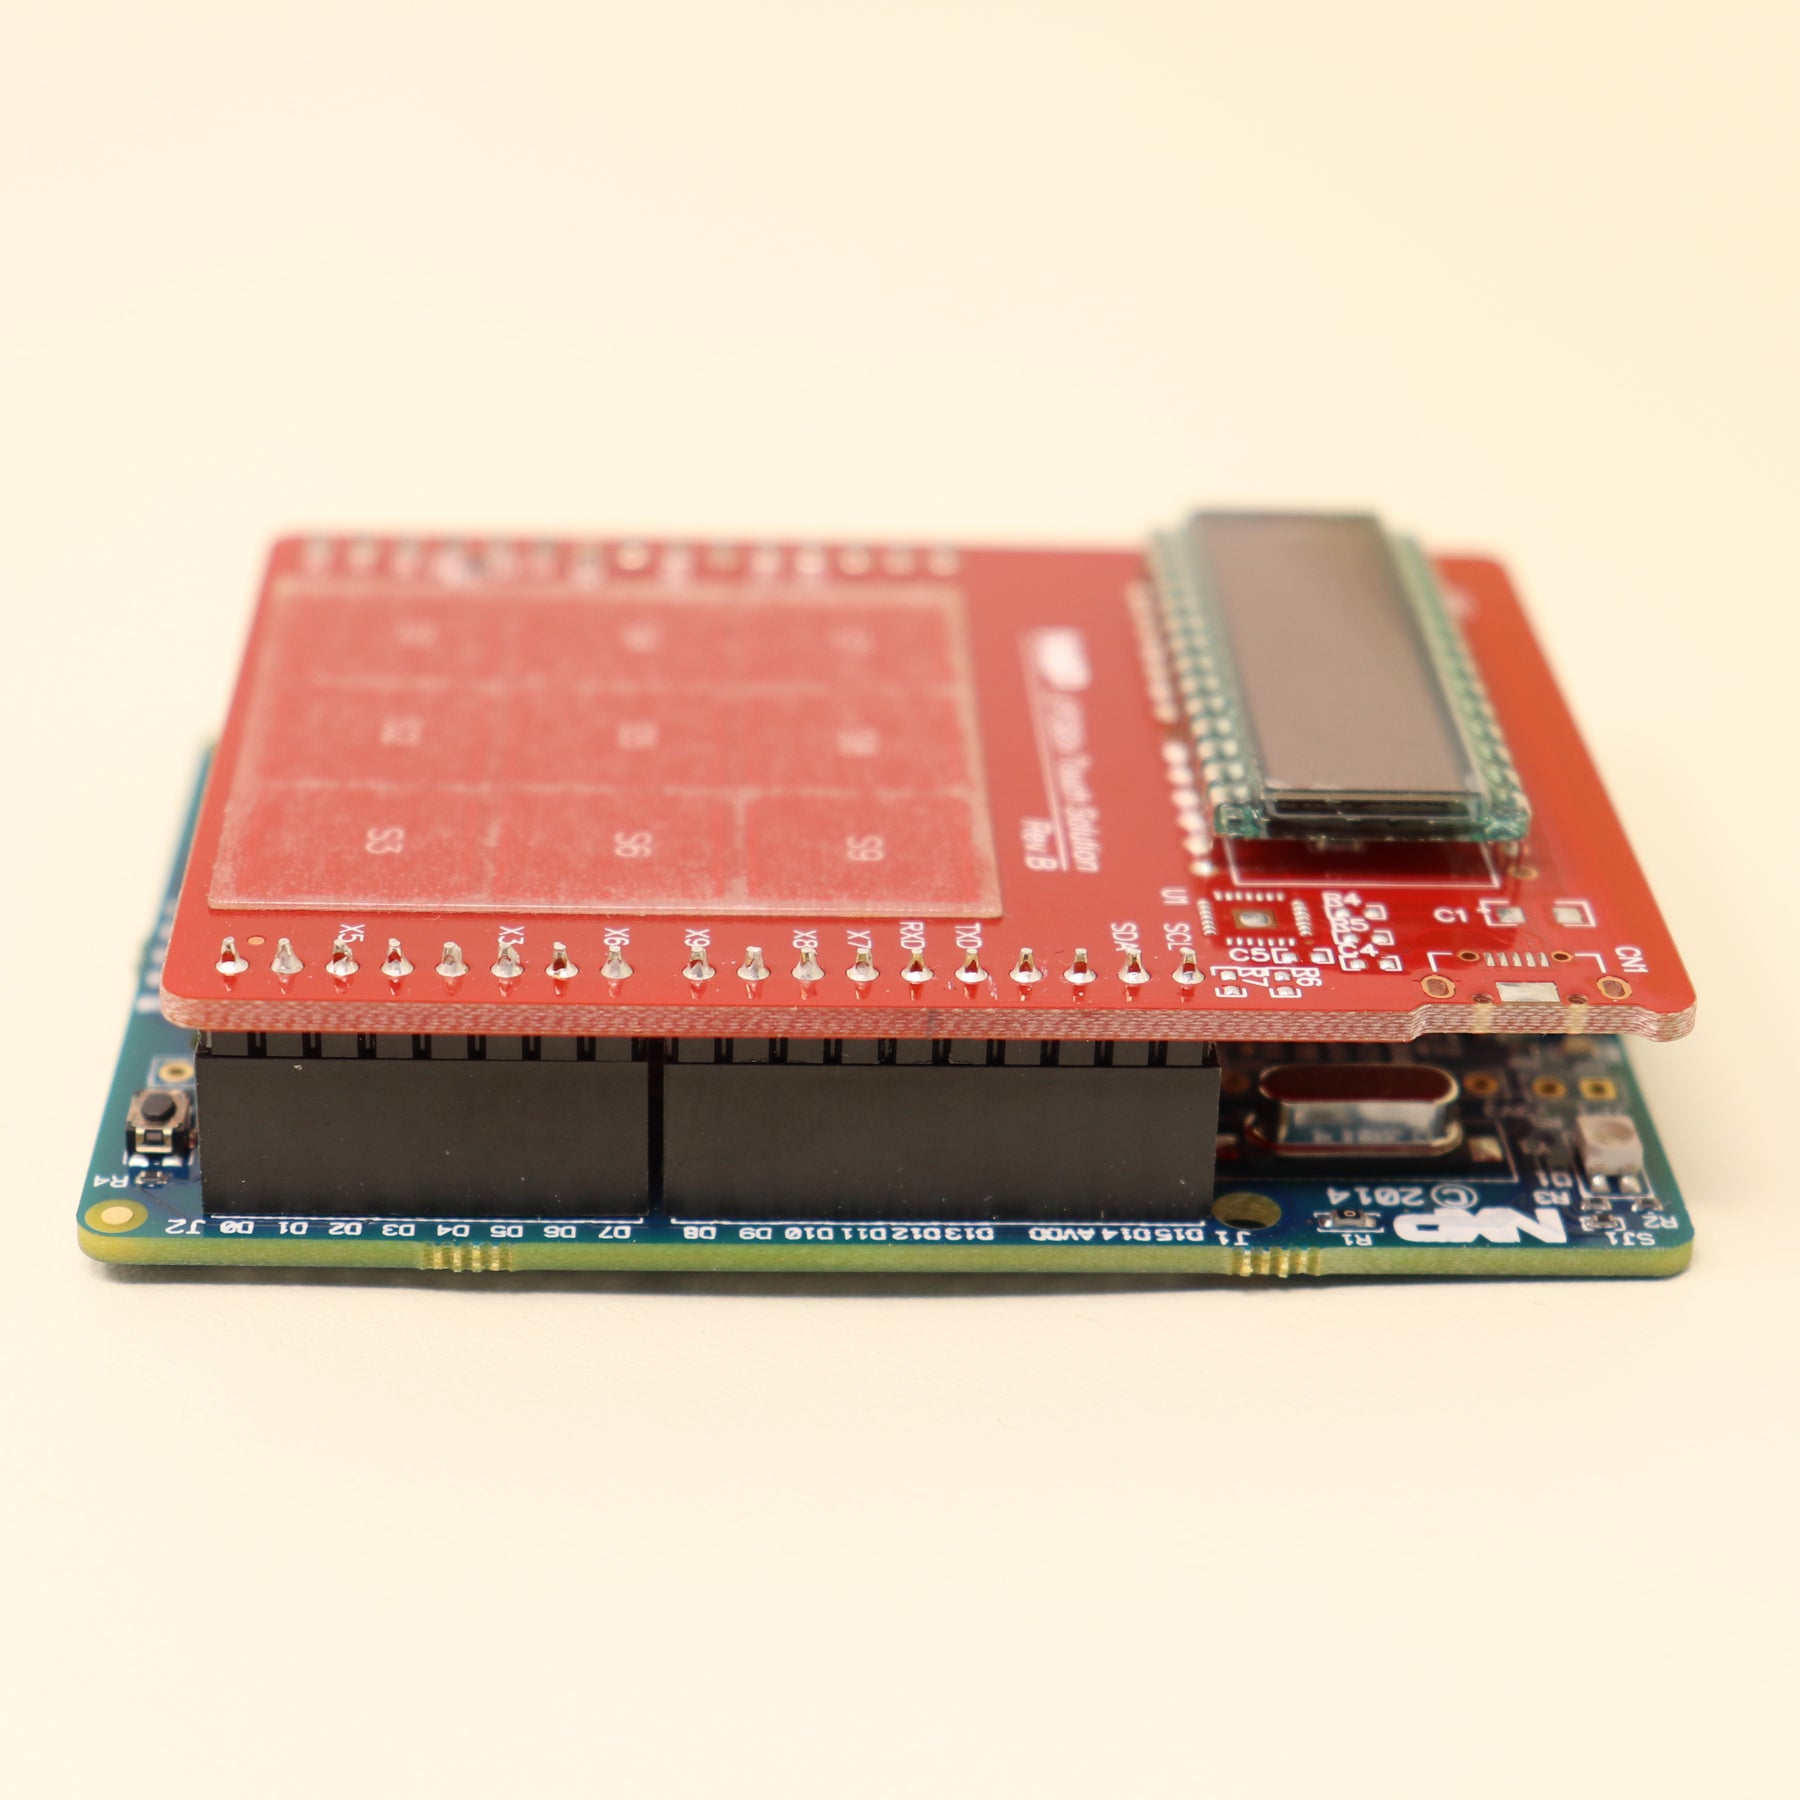 (2) NXP OM13081 LPC82x Touch Solution Rev. B Demo Board for the LPC82x family of MCUS